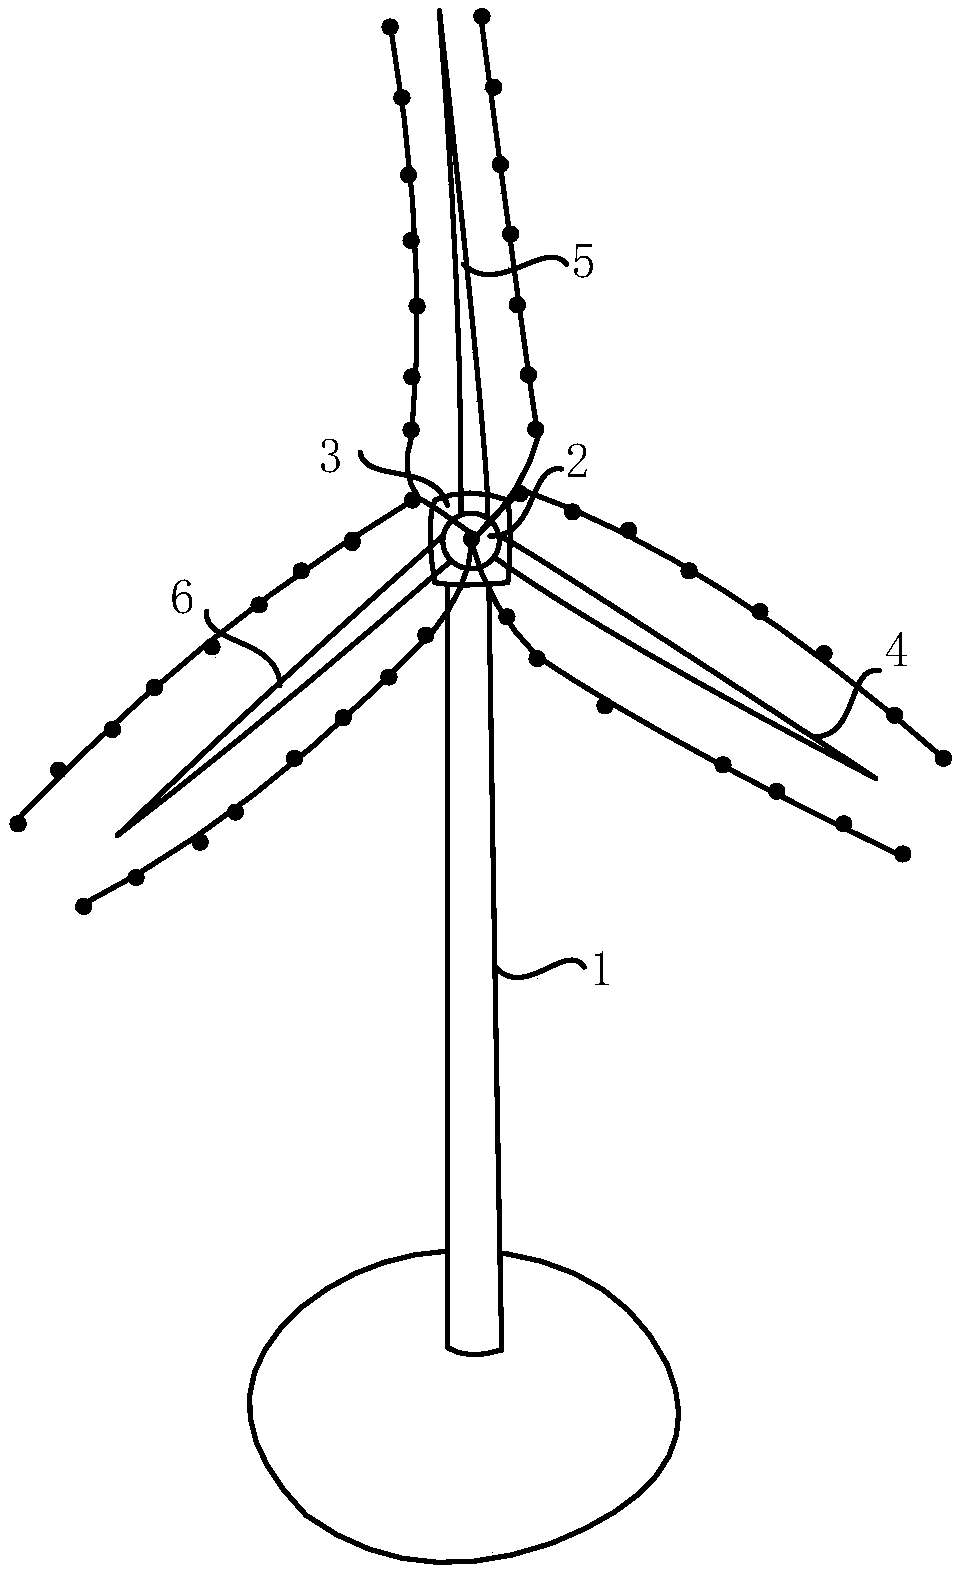 Method and system for recapturing lost blade tips of draught fan during tracking and detection of blade tips through drone